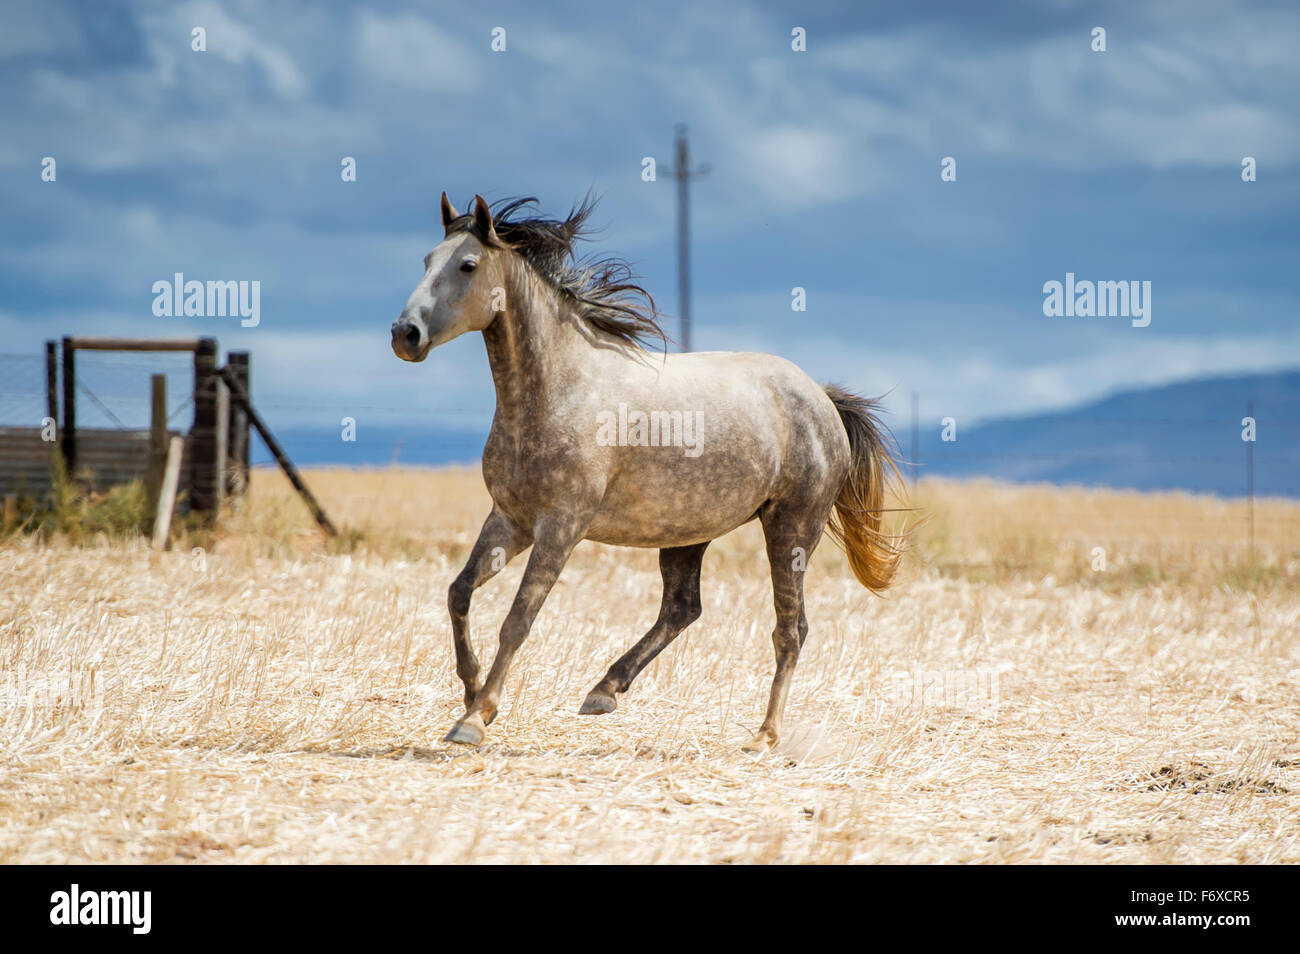 Horse running in a field; Cape Town, Western Cape, South Africa Stock Photo